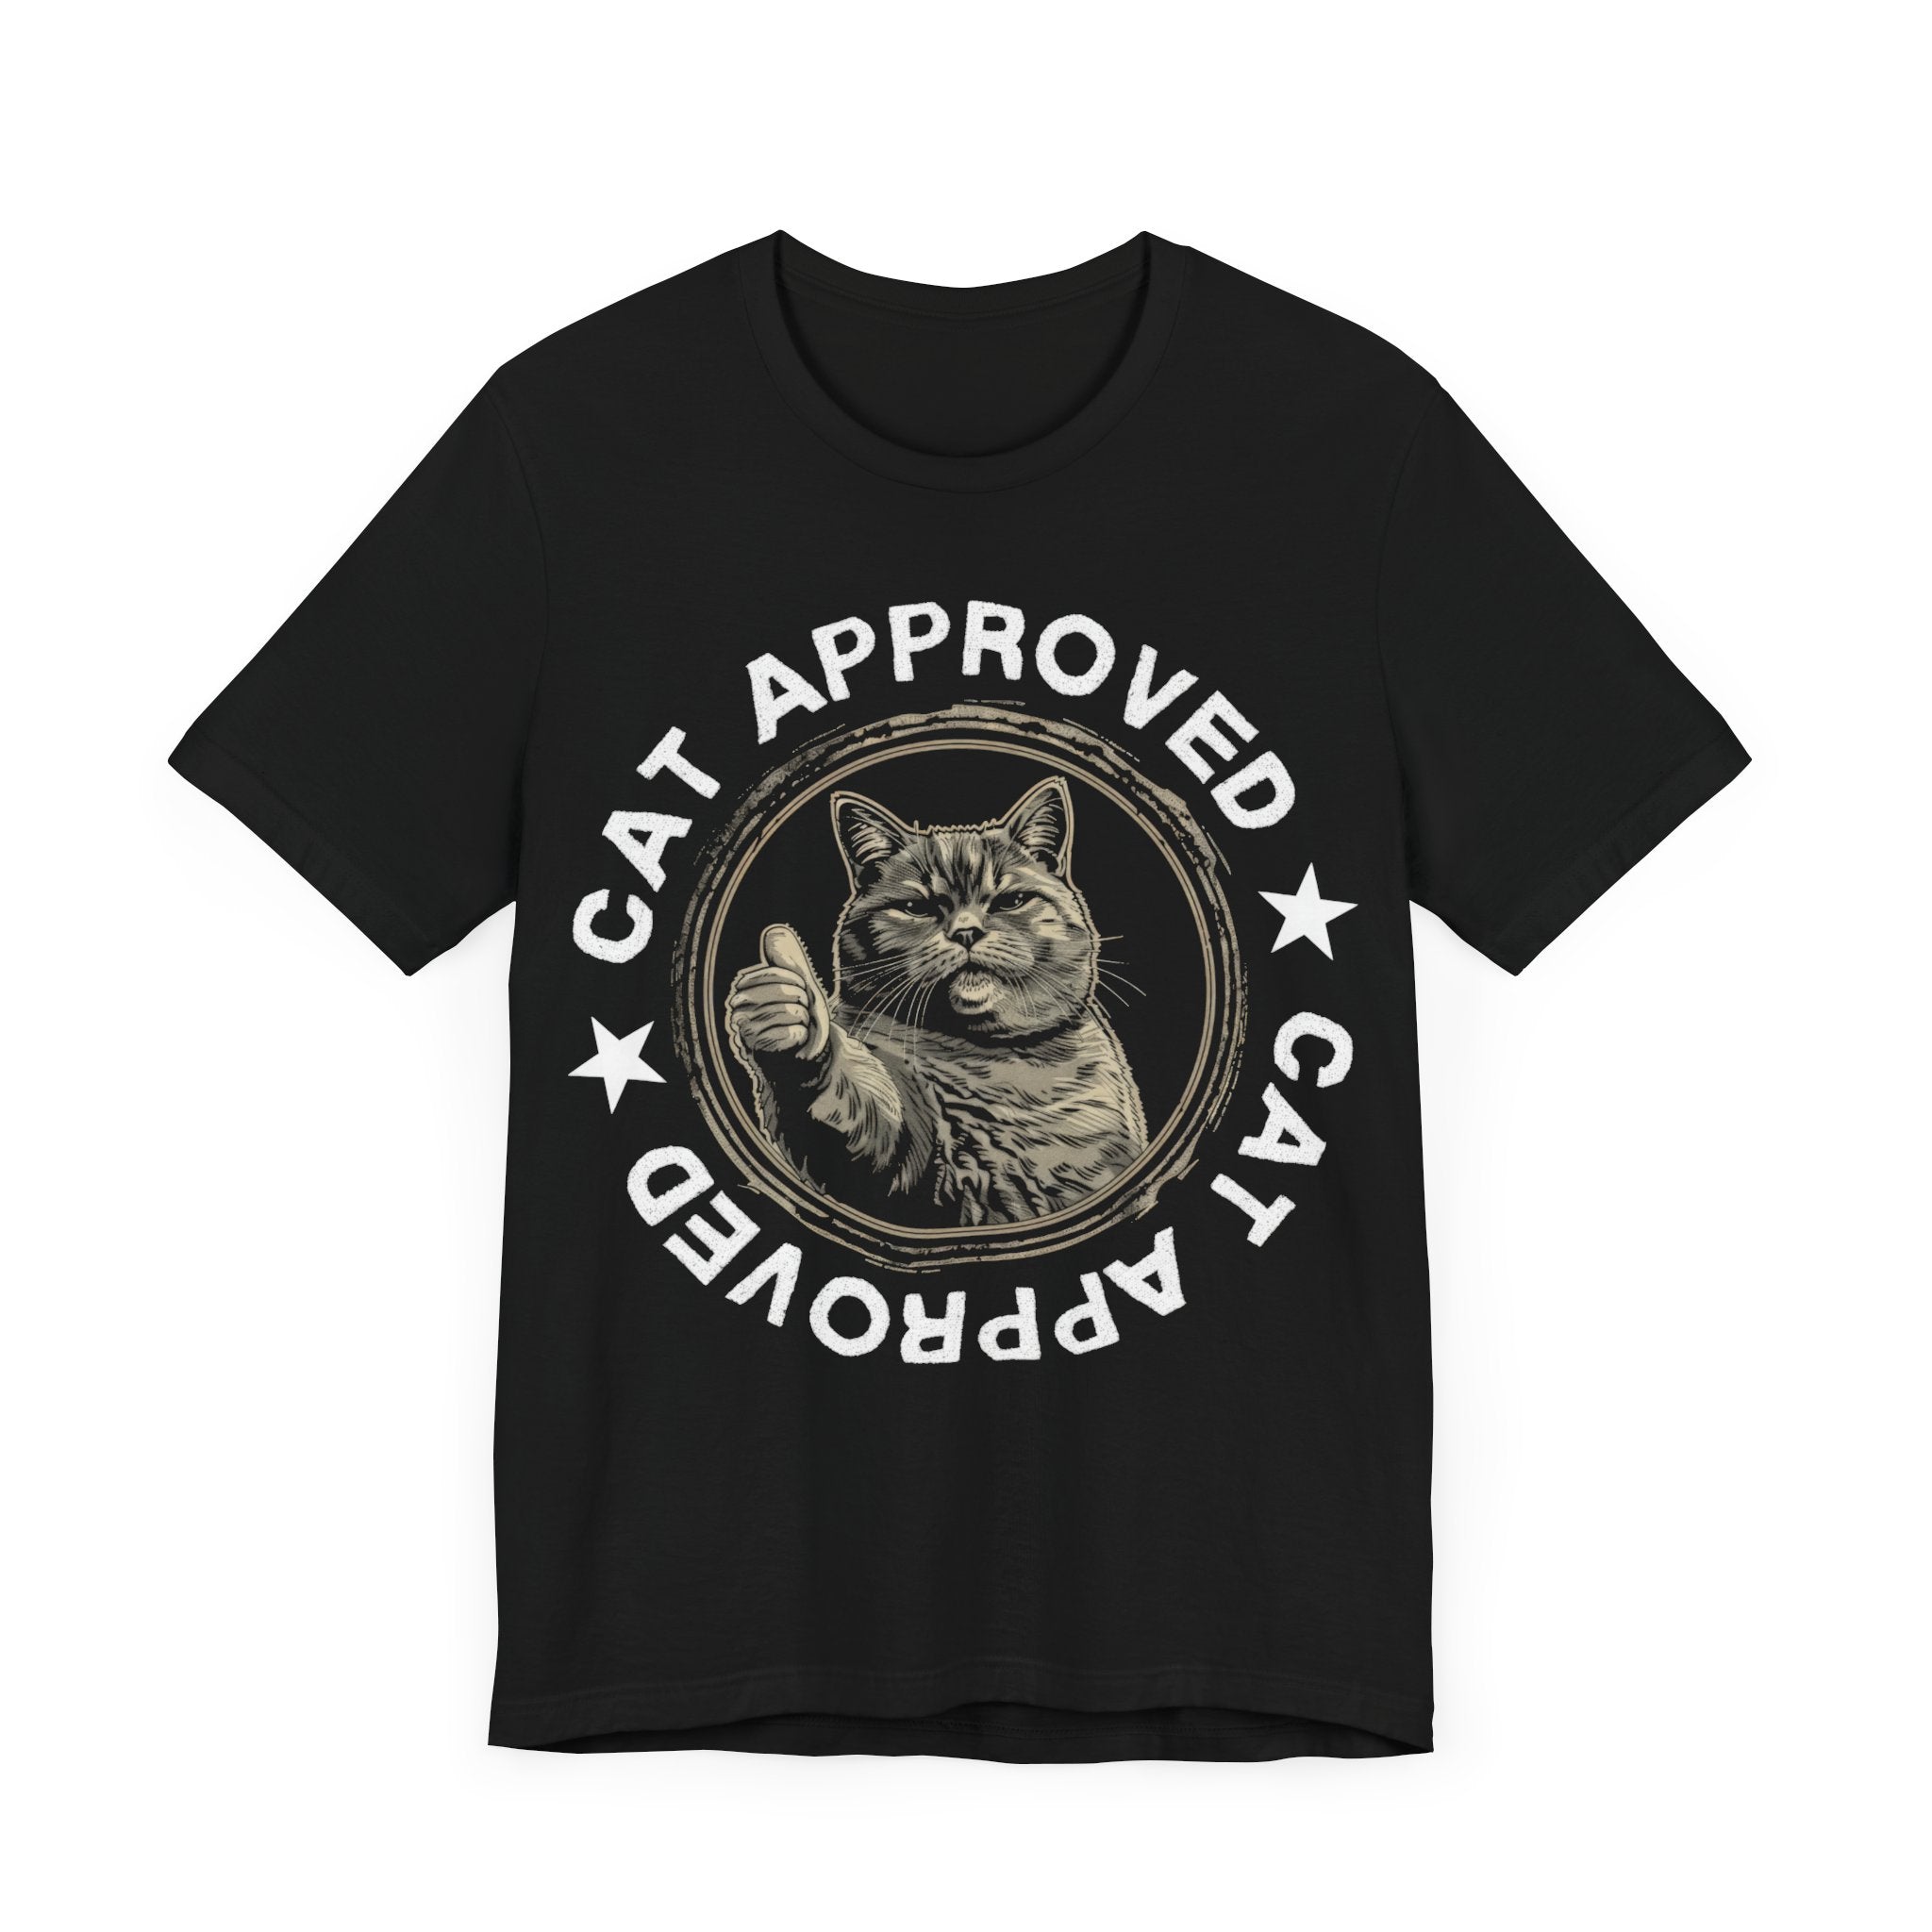 Cat Approved T-Shirt | Unisex Black Tee with Cat Thumbs Up Graphic | Pet Lover Gift